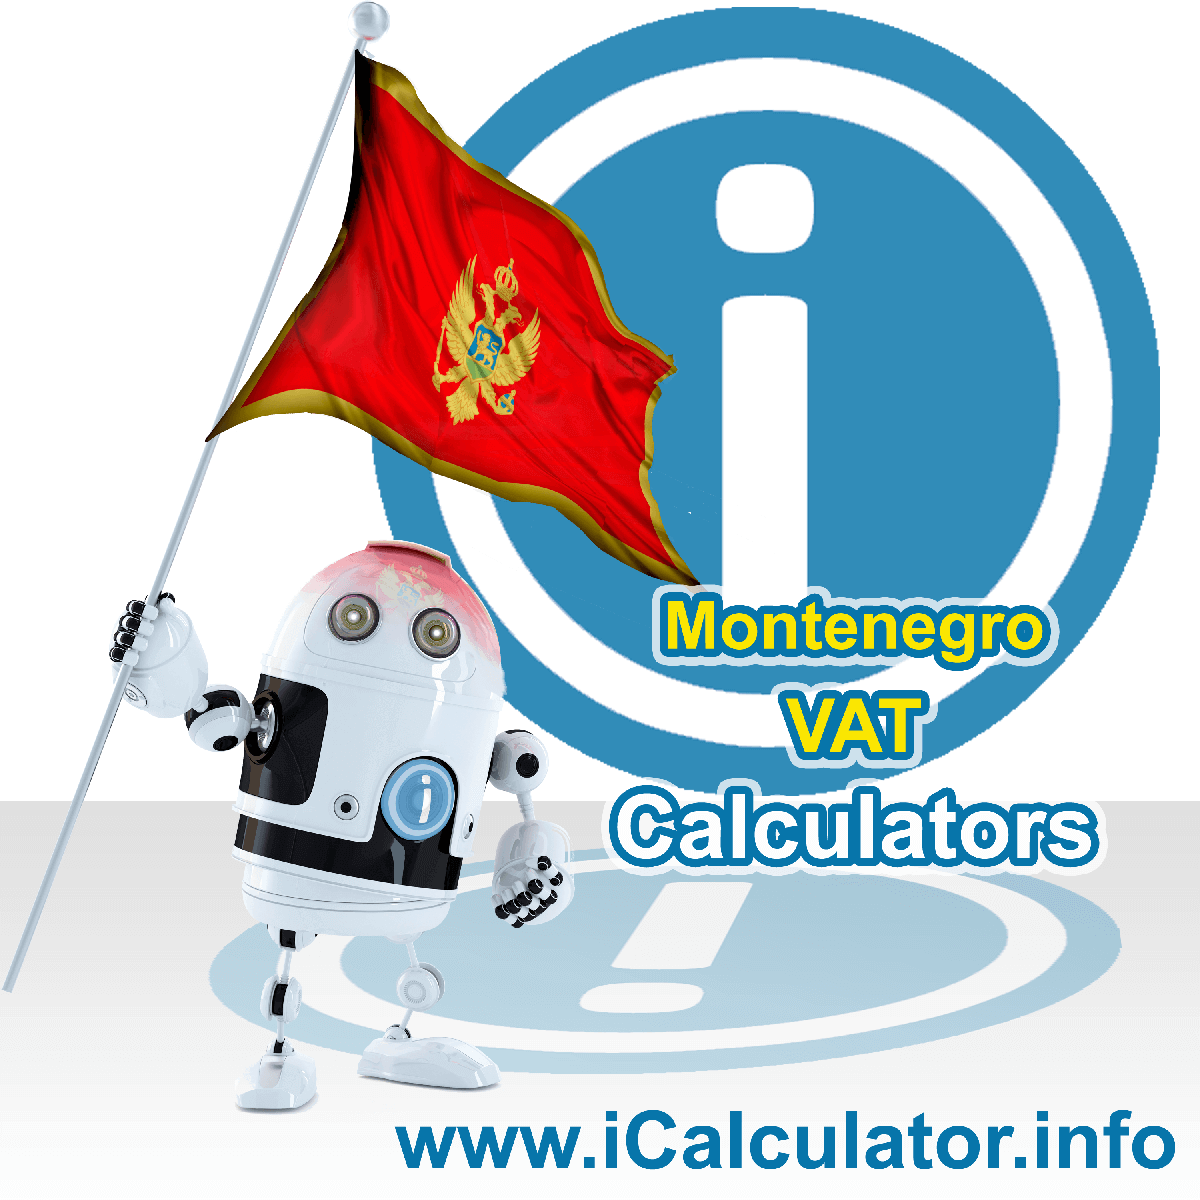 Montenegro VAT Calculator. This image shows the Montenegro flag and information relating to the VAT formula used for calculating Value Added Tax in Montenegro using the Montenegro VAT Calculator in 2023